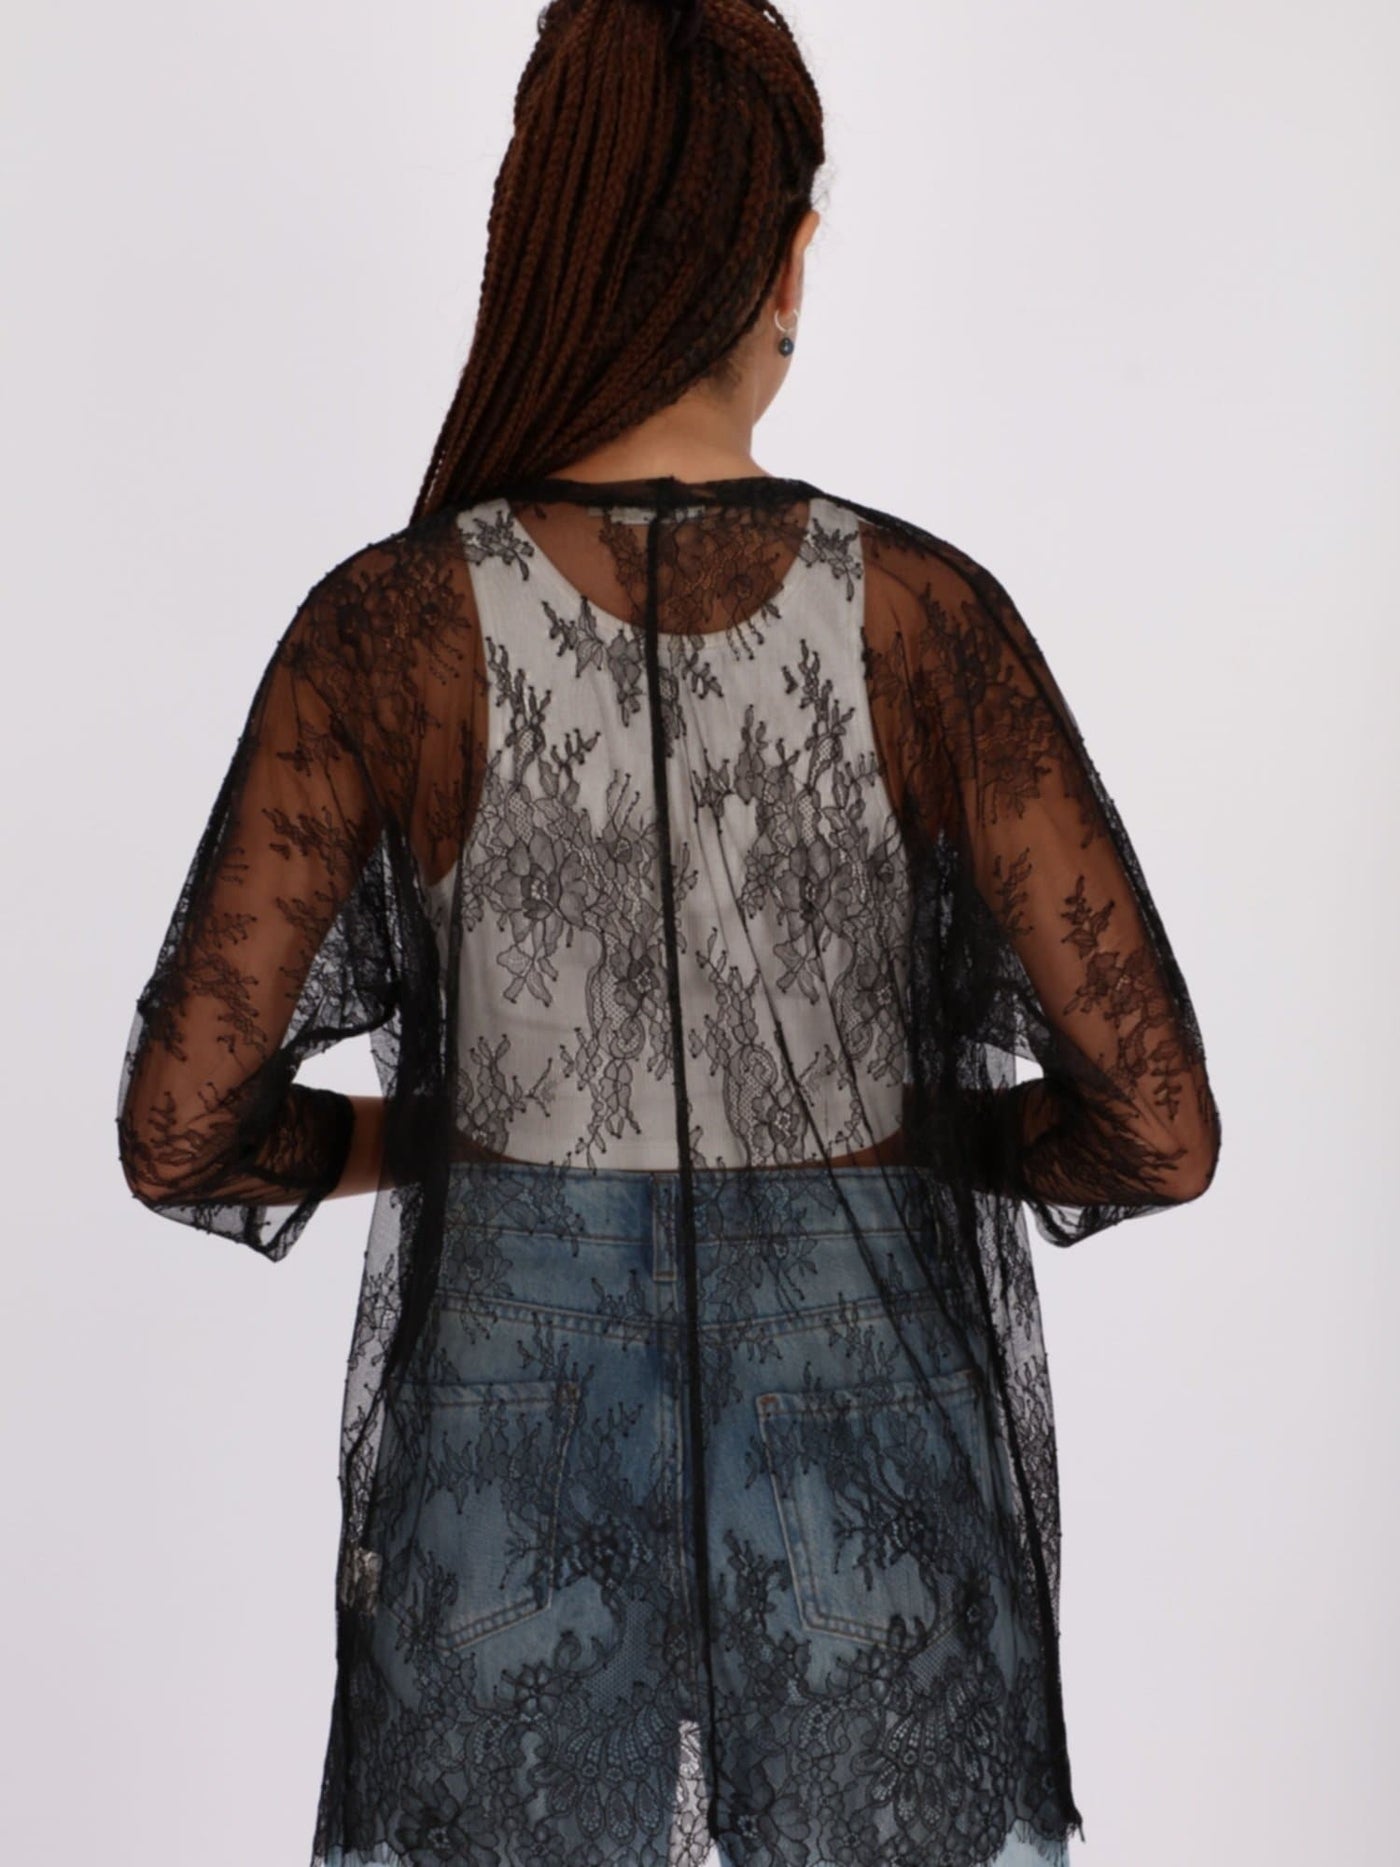 OR Jackets & Cardigans 3/4 Sleeve Front Open Lace Cardigan